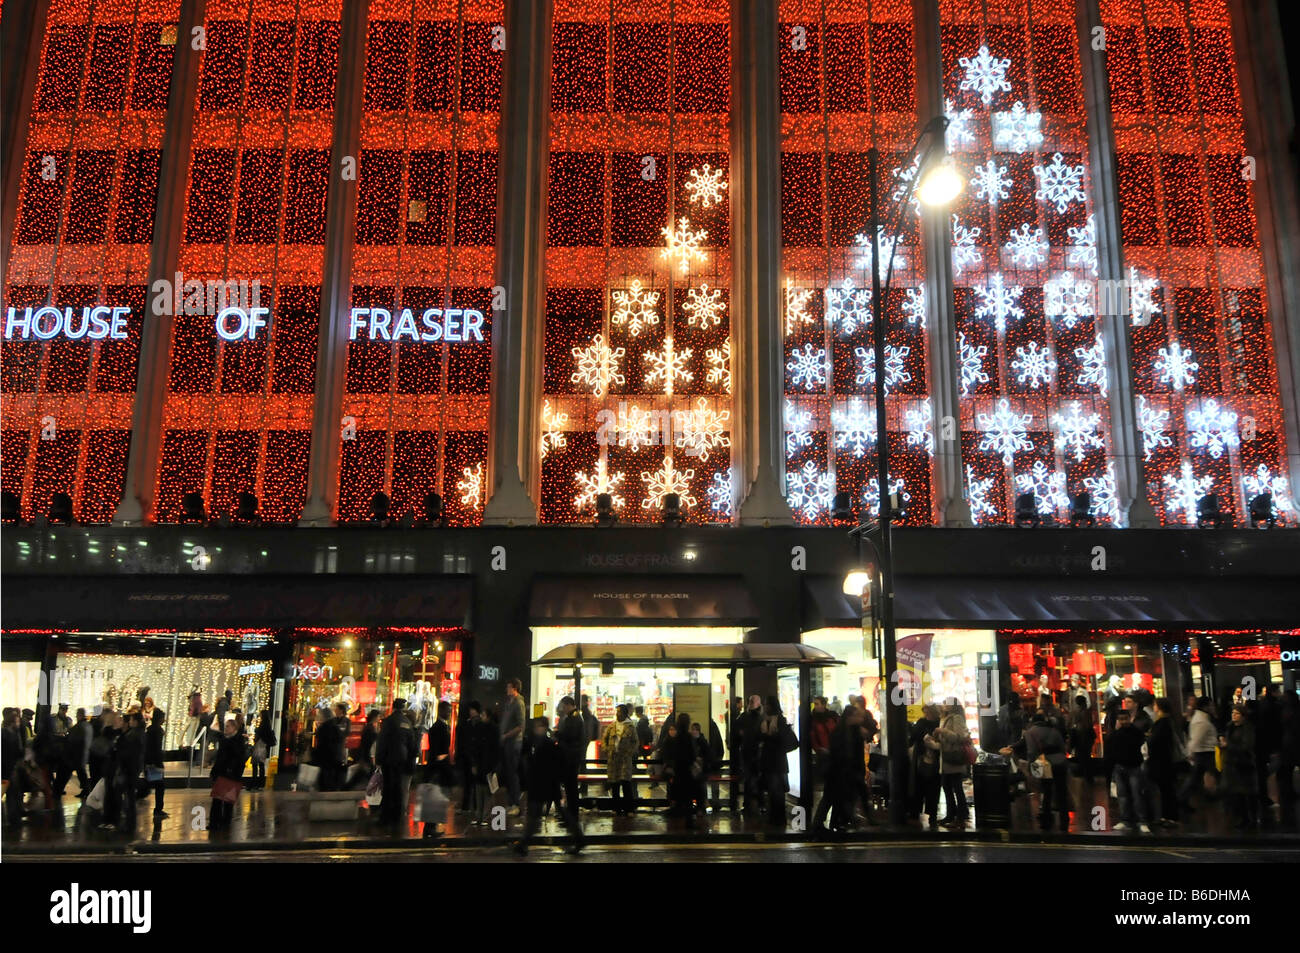 House of Fraser department store Oxford street with Christmas lights West End London England UK Stock Photo